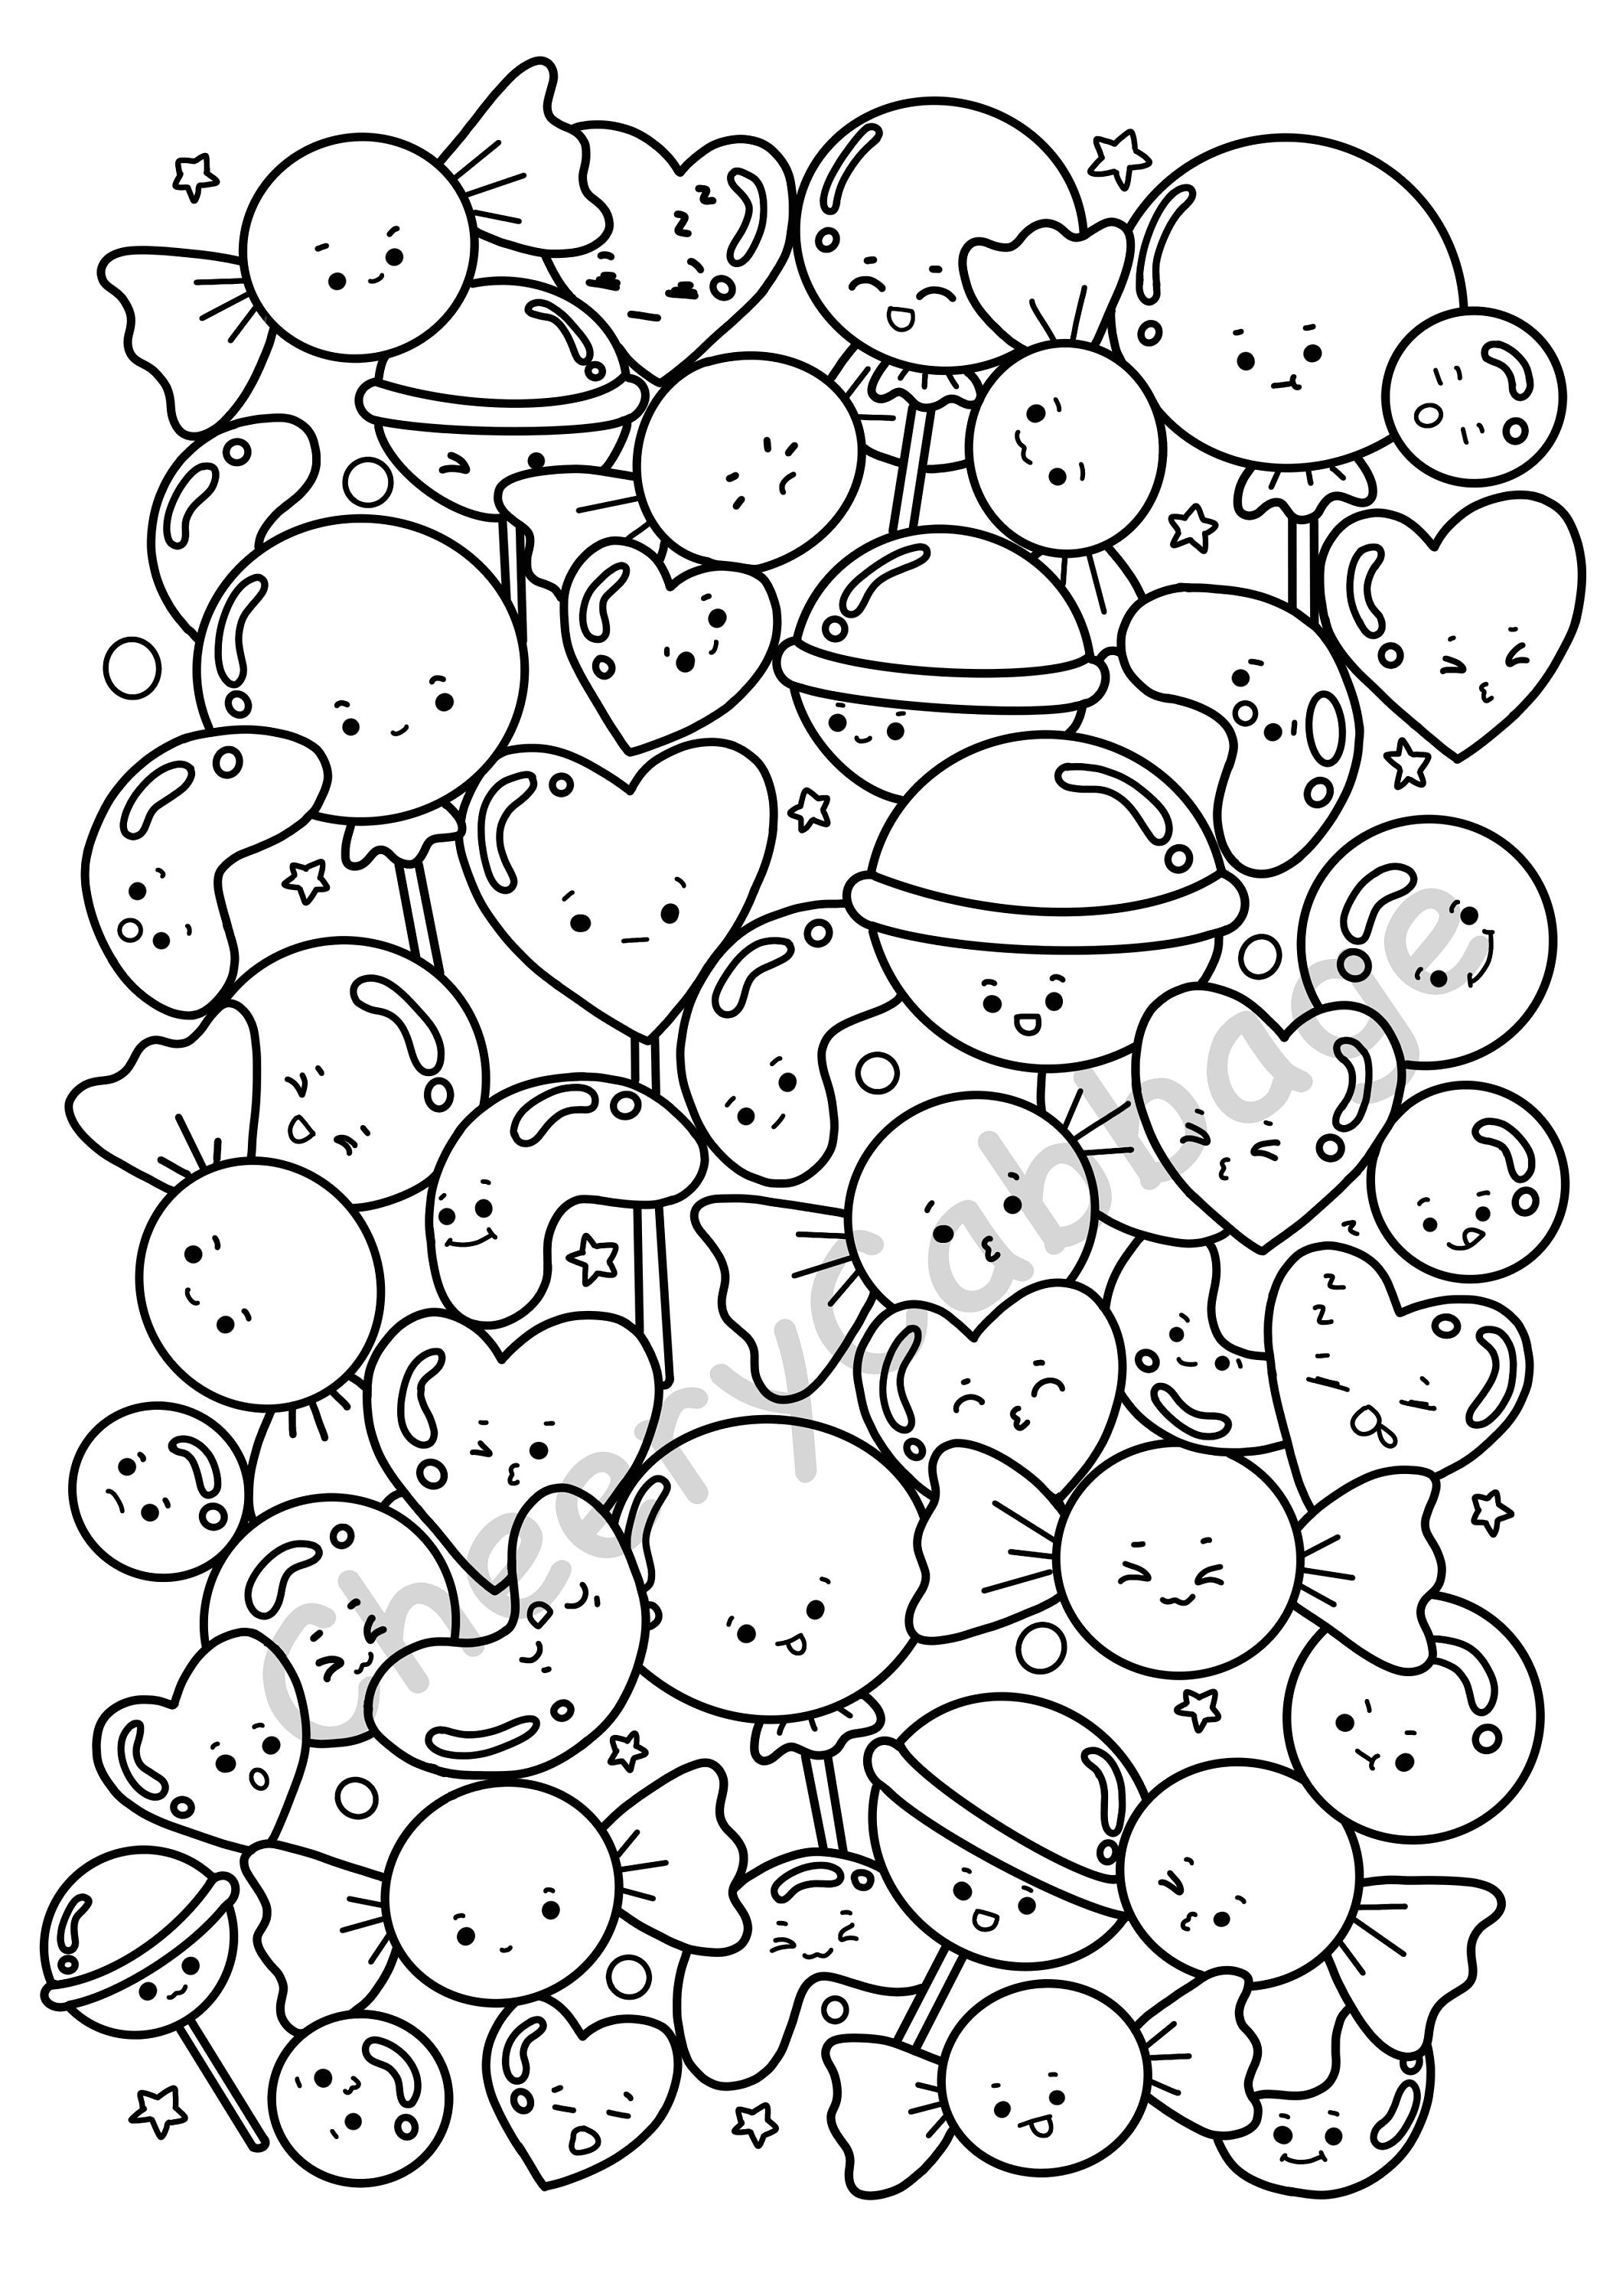 Candy coloring page printable coloring page for kid and adult instant download